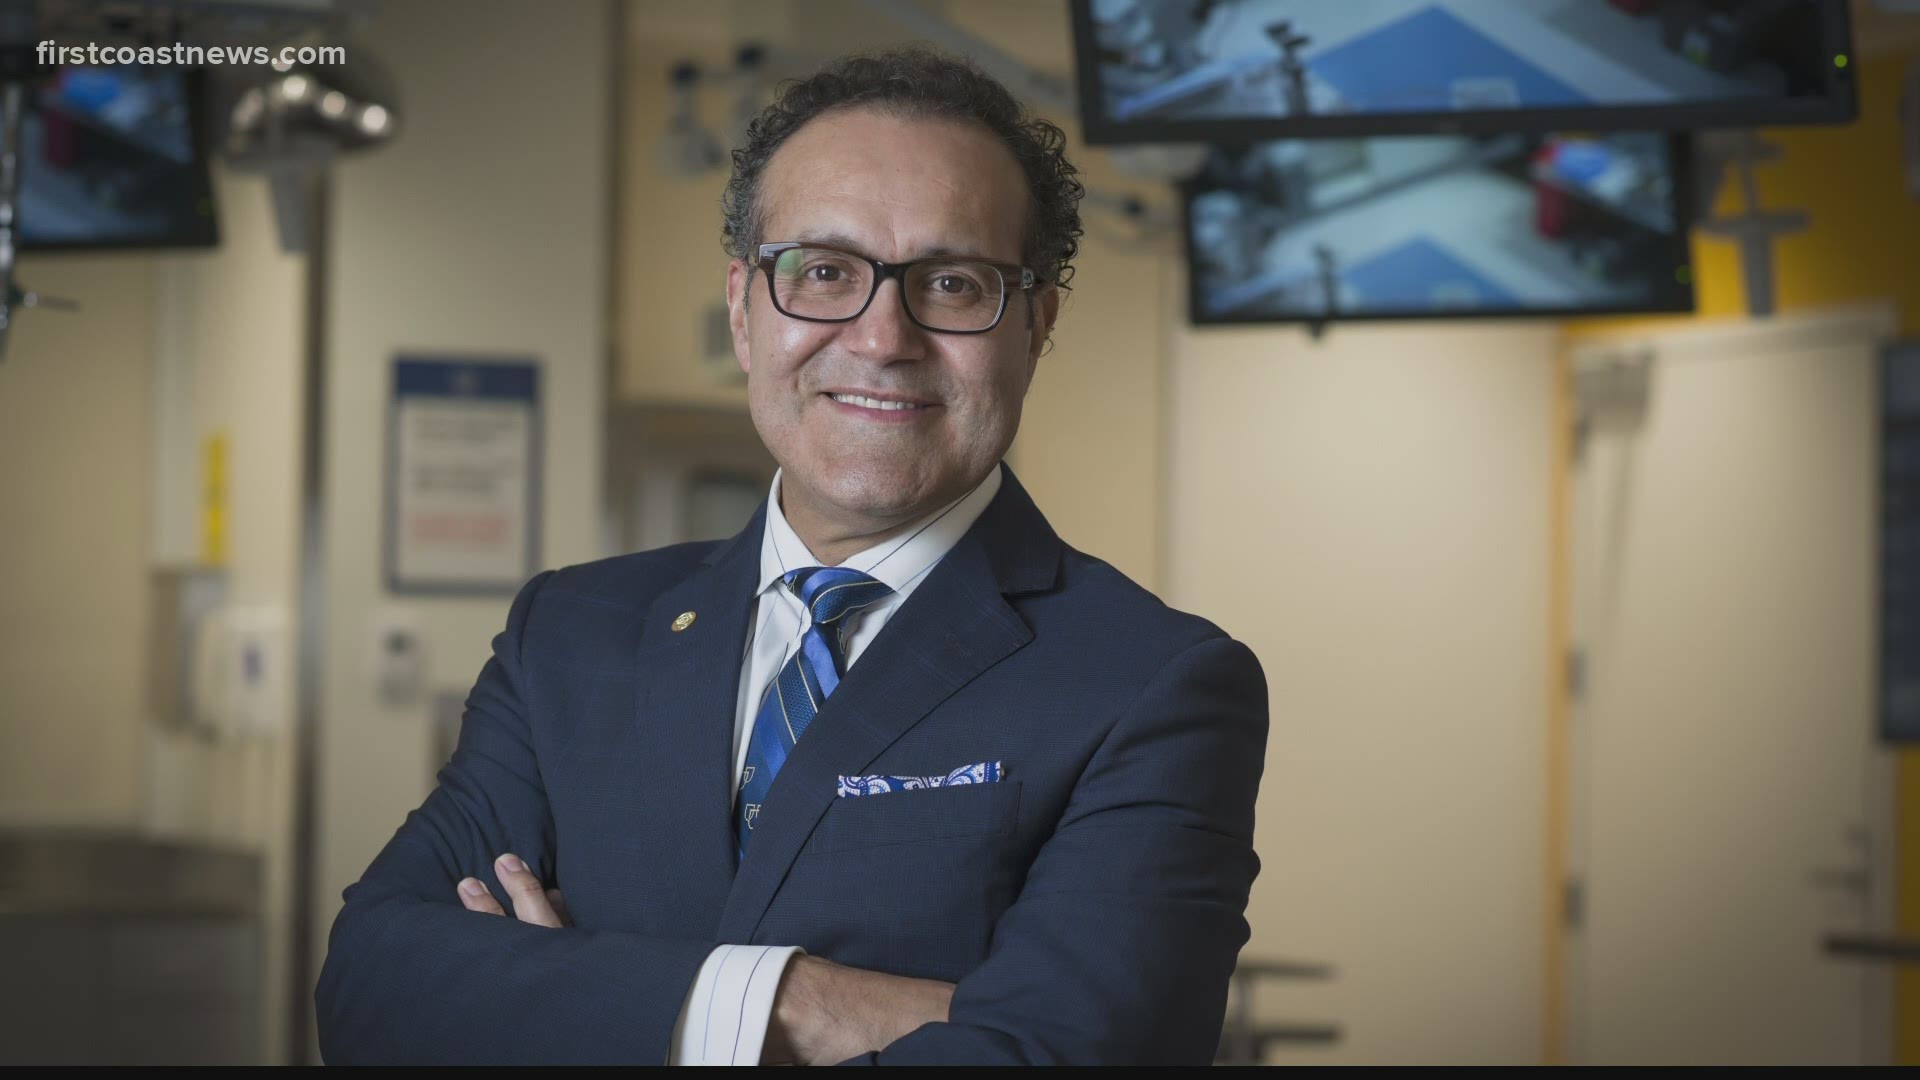 Dr. Alfredo Quinones-Hinojosa is featured in a Netflix BBC partner documentary "Surgeon's Cut," streaming on Netflix on Dec. 9.